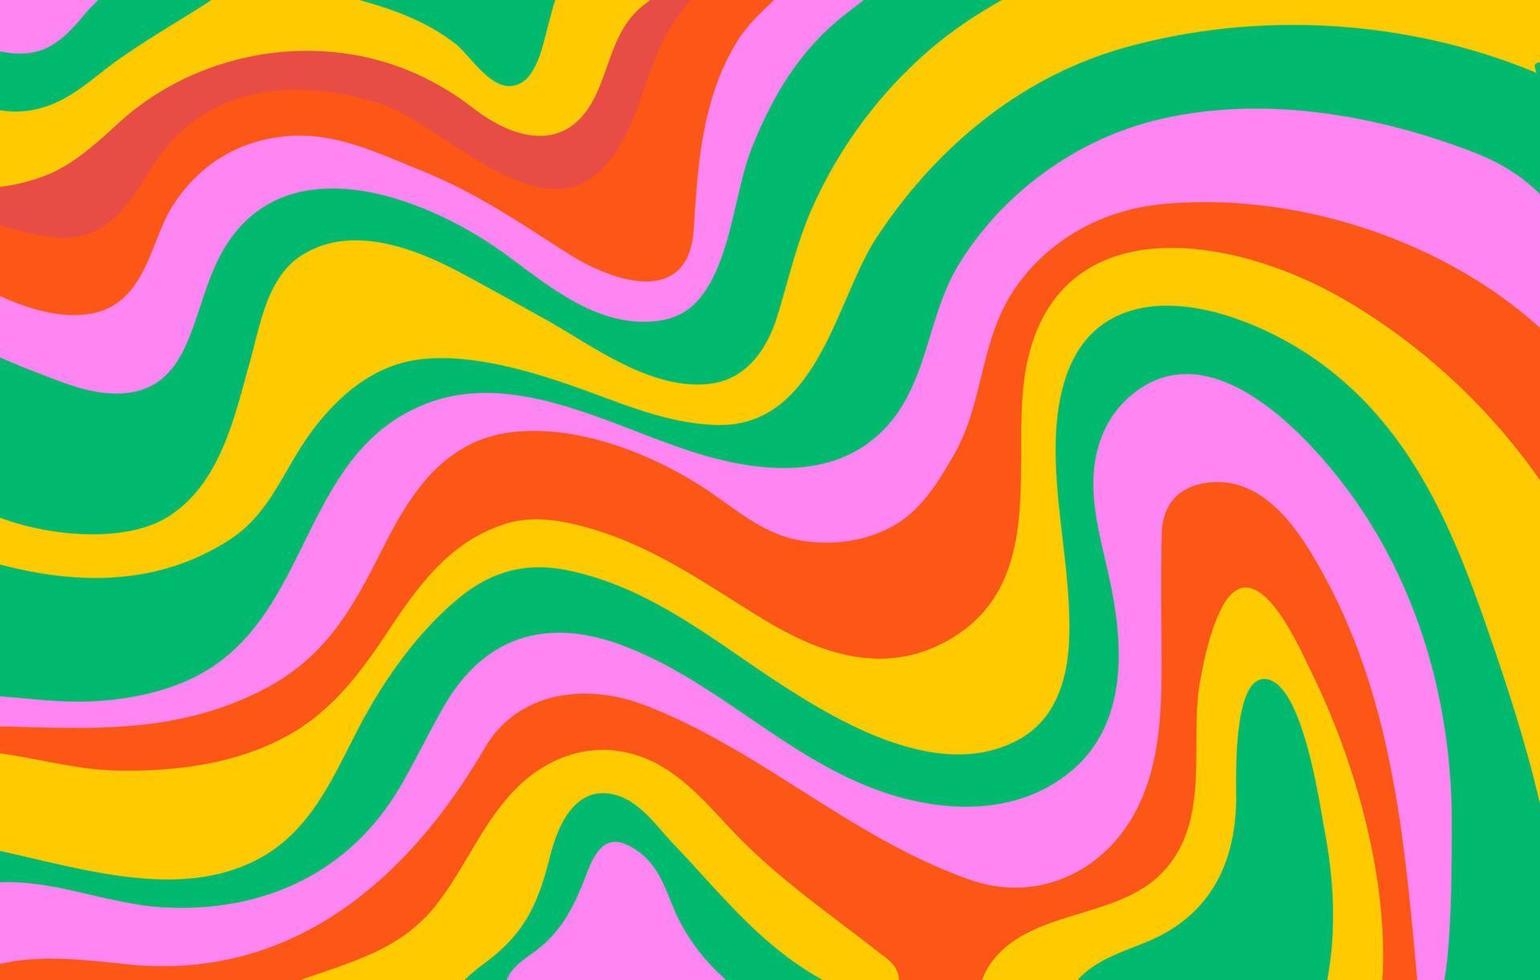 Abstract horizontal psychedelic background with colorful waves. Trendy vector illustration in style hippie 60s, 70s.